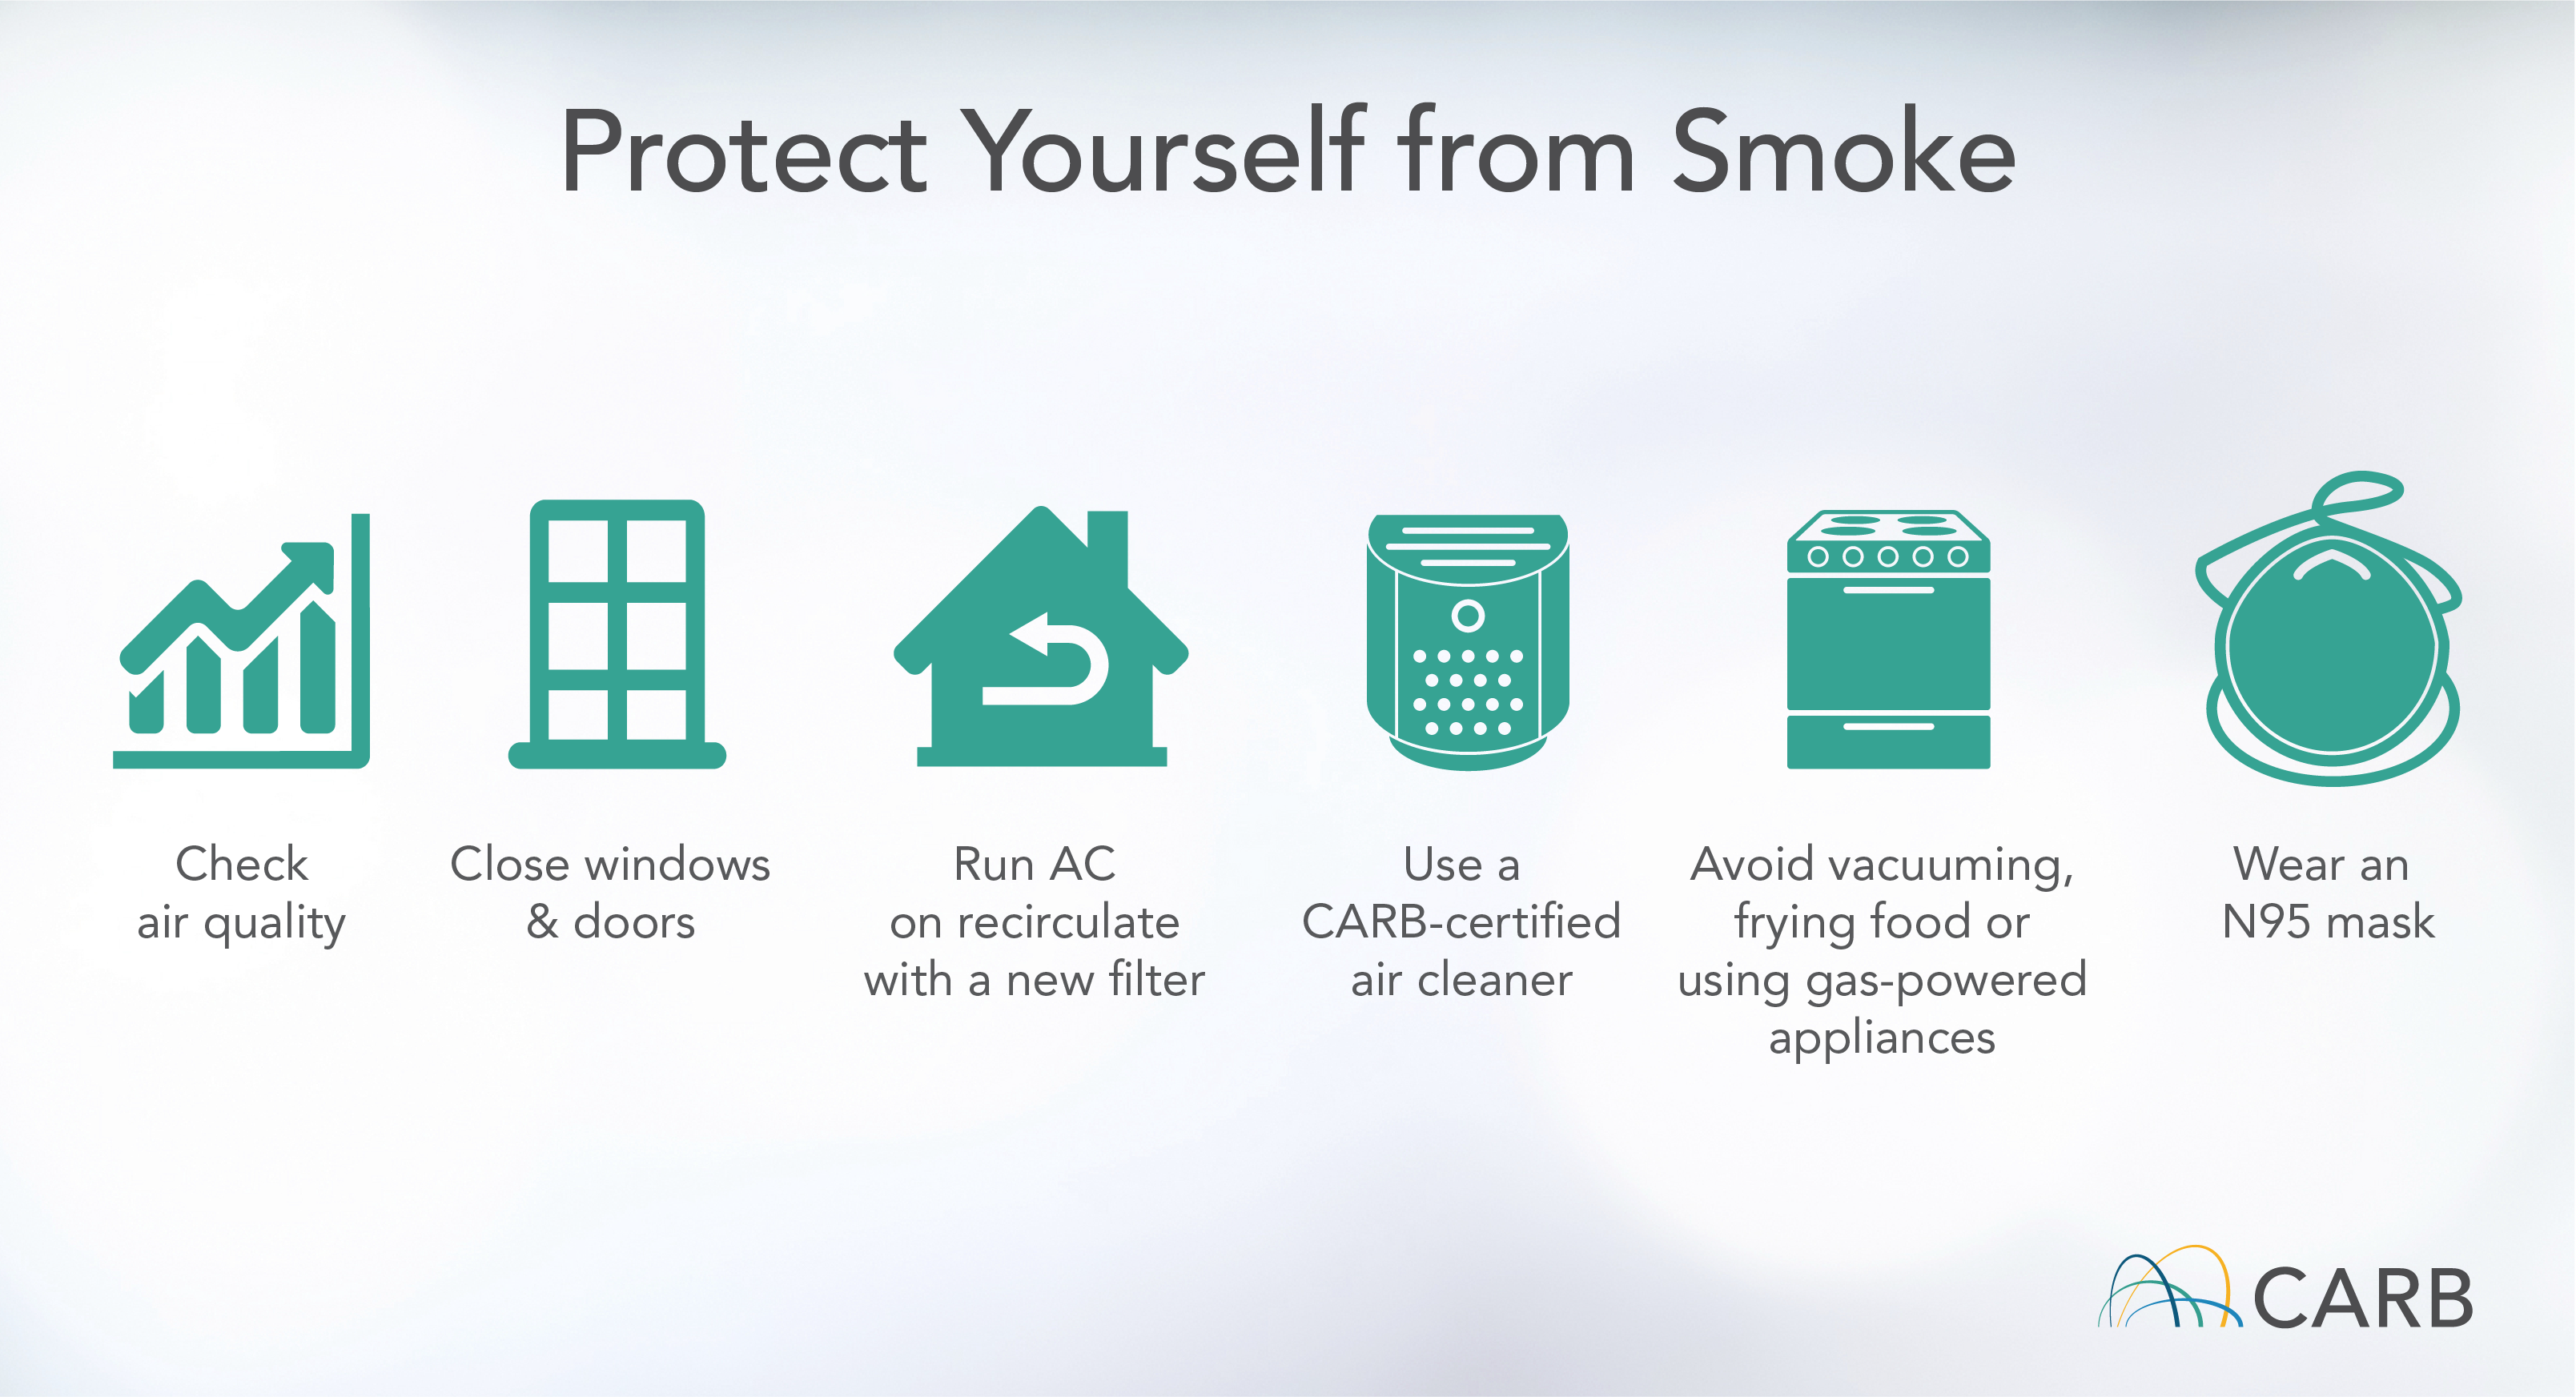 Protect Yourself from Smoke: Check air quality, Close windows & doors, Run AC on recirculate with a new filter, Use a CARB-certified air cleaner, Avoid vacuuming, frying food or using gas-powered appliances, Wear an N95 mask 